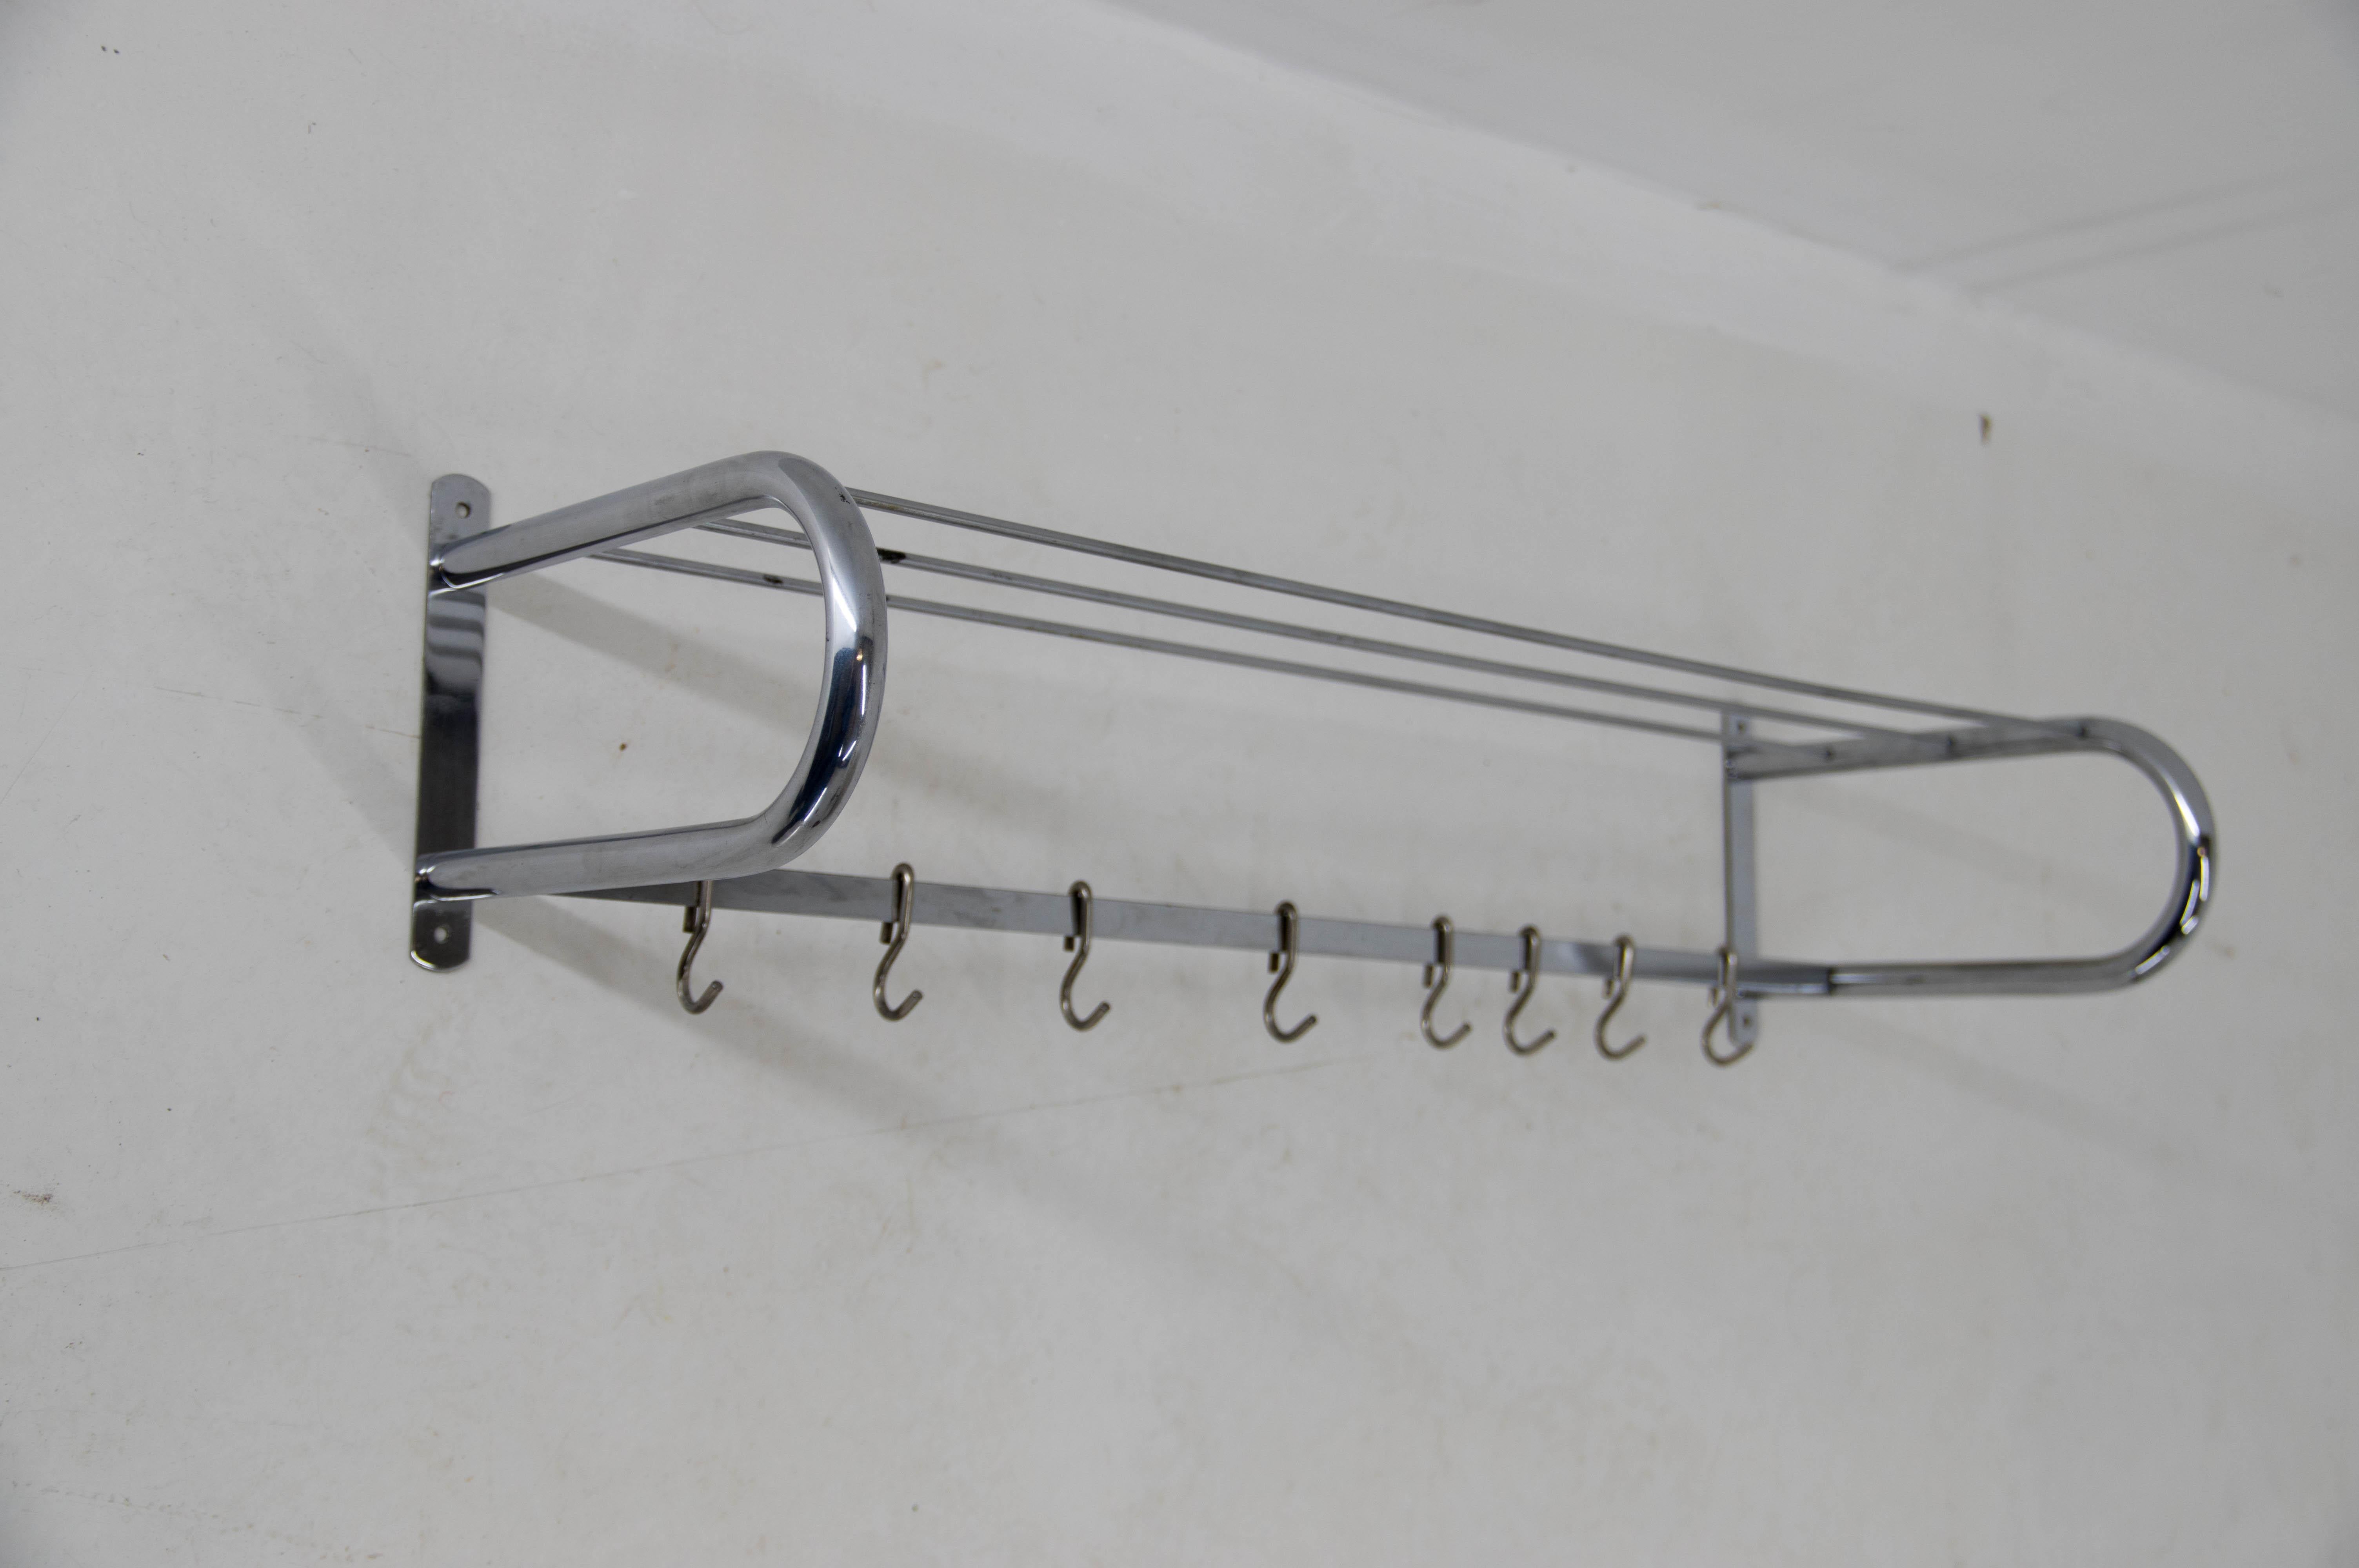 Bauhaus wall coat hanger with 8 hooks.
Chrome with minor age patina.